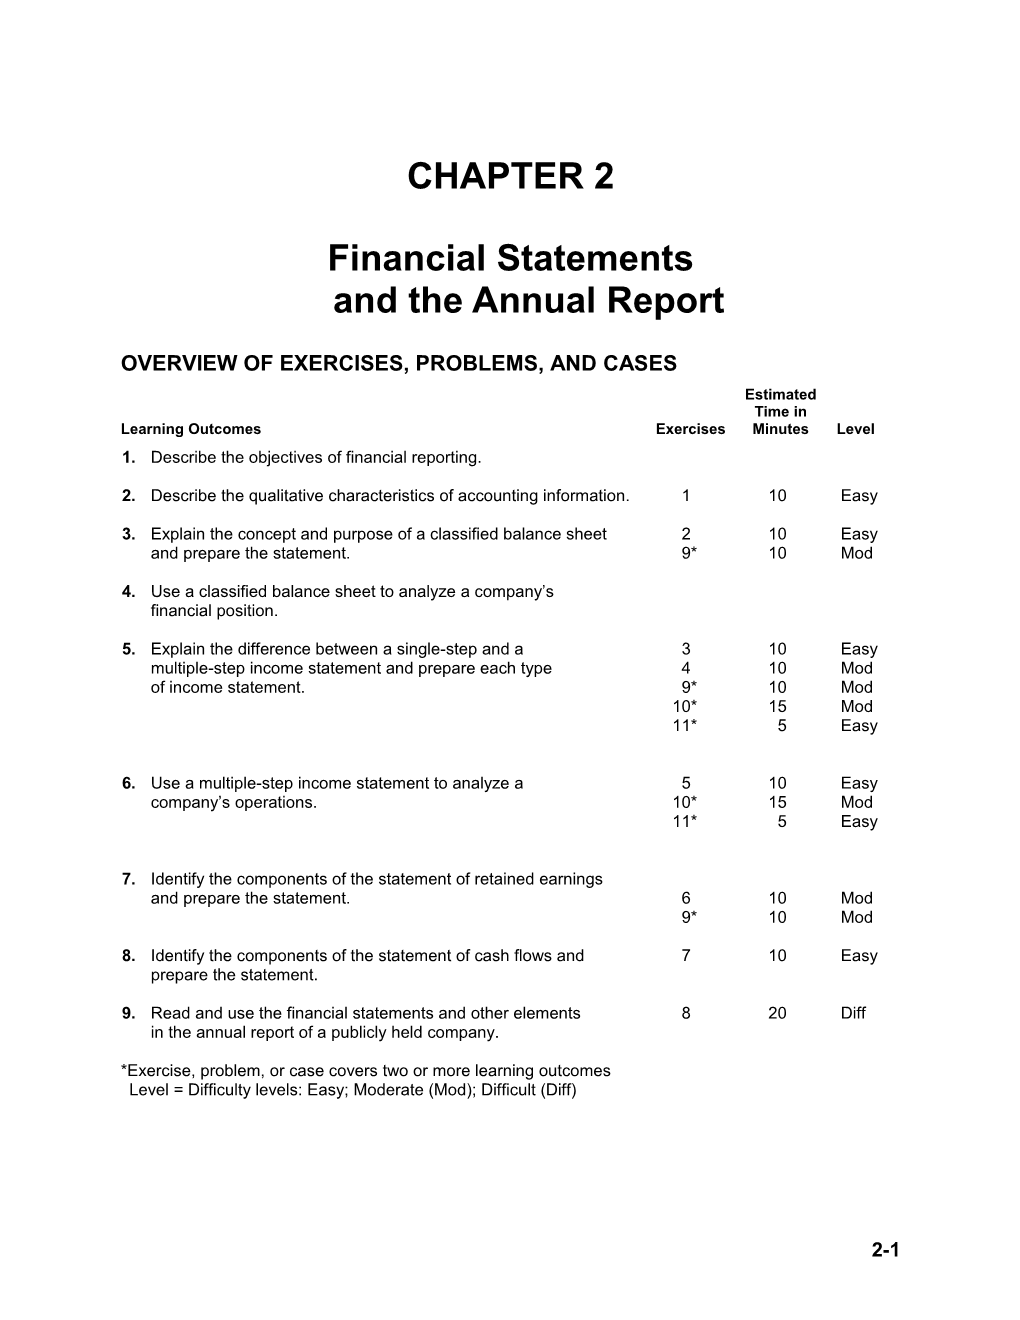 Chapter 2: Financial Statements and the Annual Report